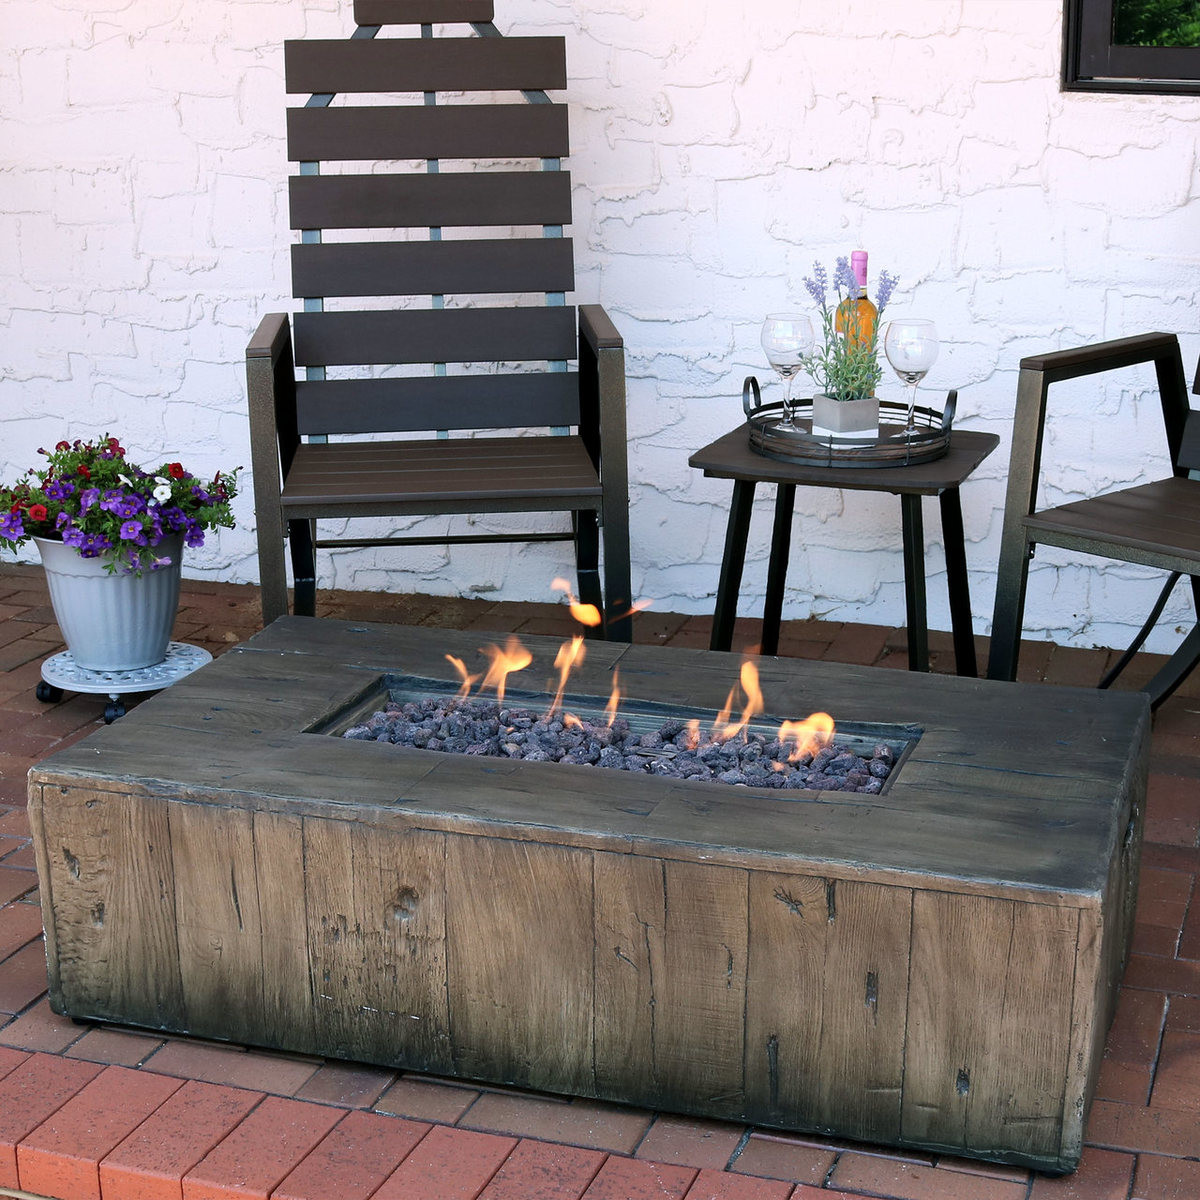 Coffee Table Fire Pit
 Sunnydaze 48 Inch Rustic Faux Wood Outdoor Propane Gas